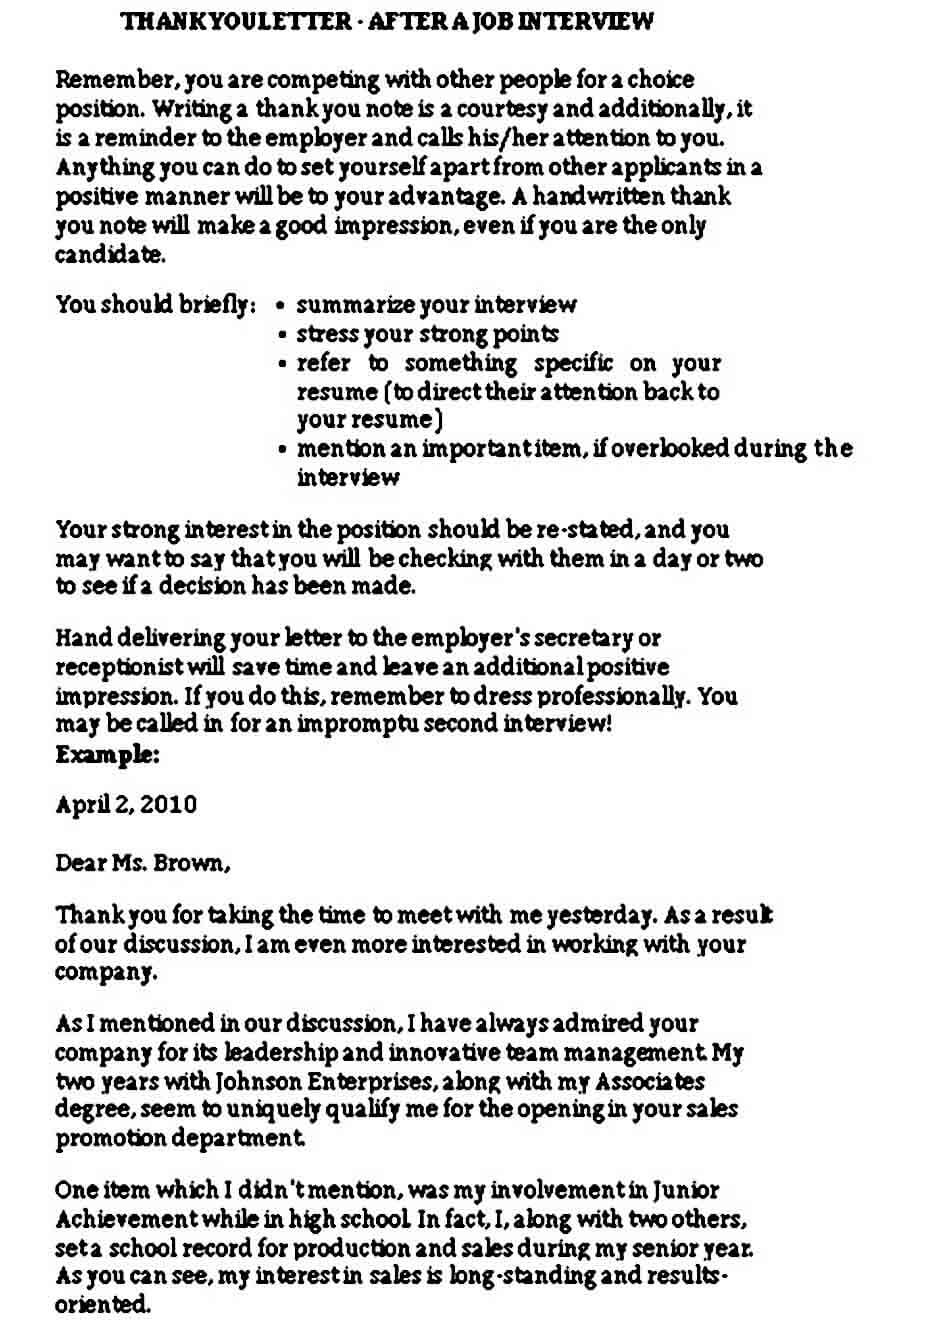 Thank You Letter After Teaching Job Interview